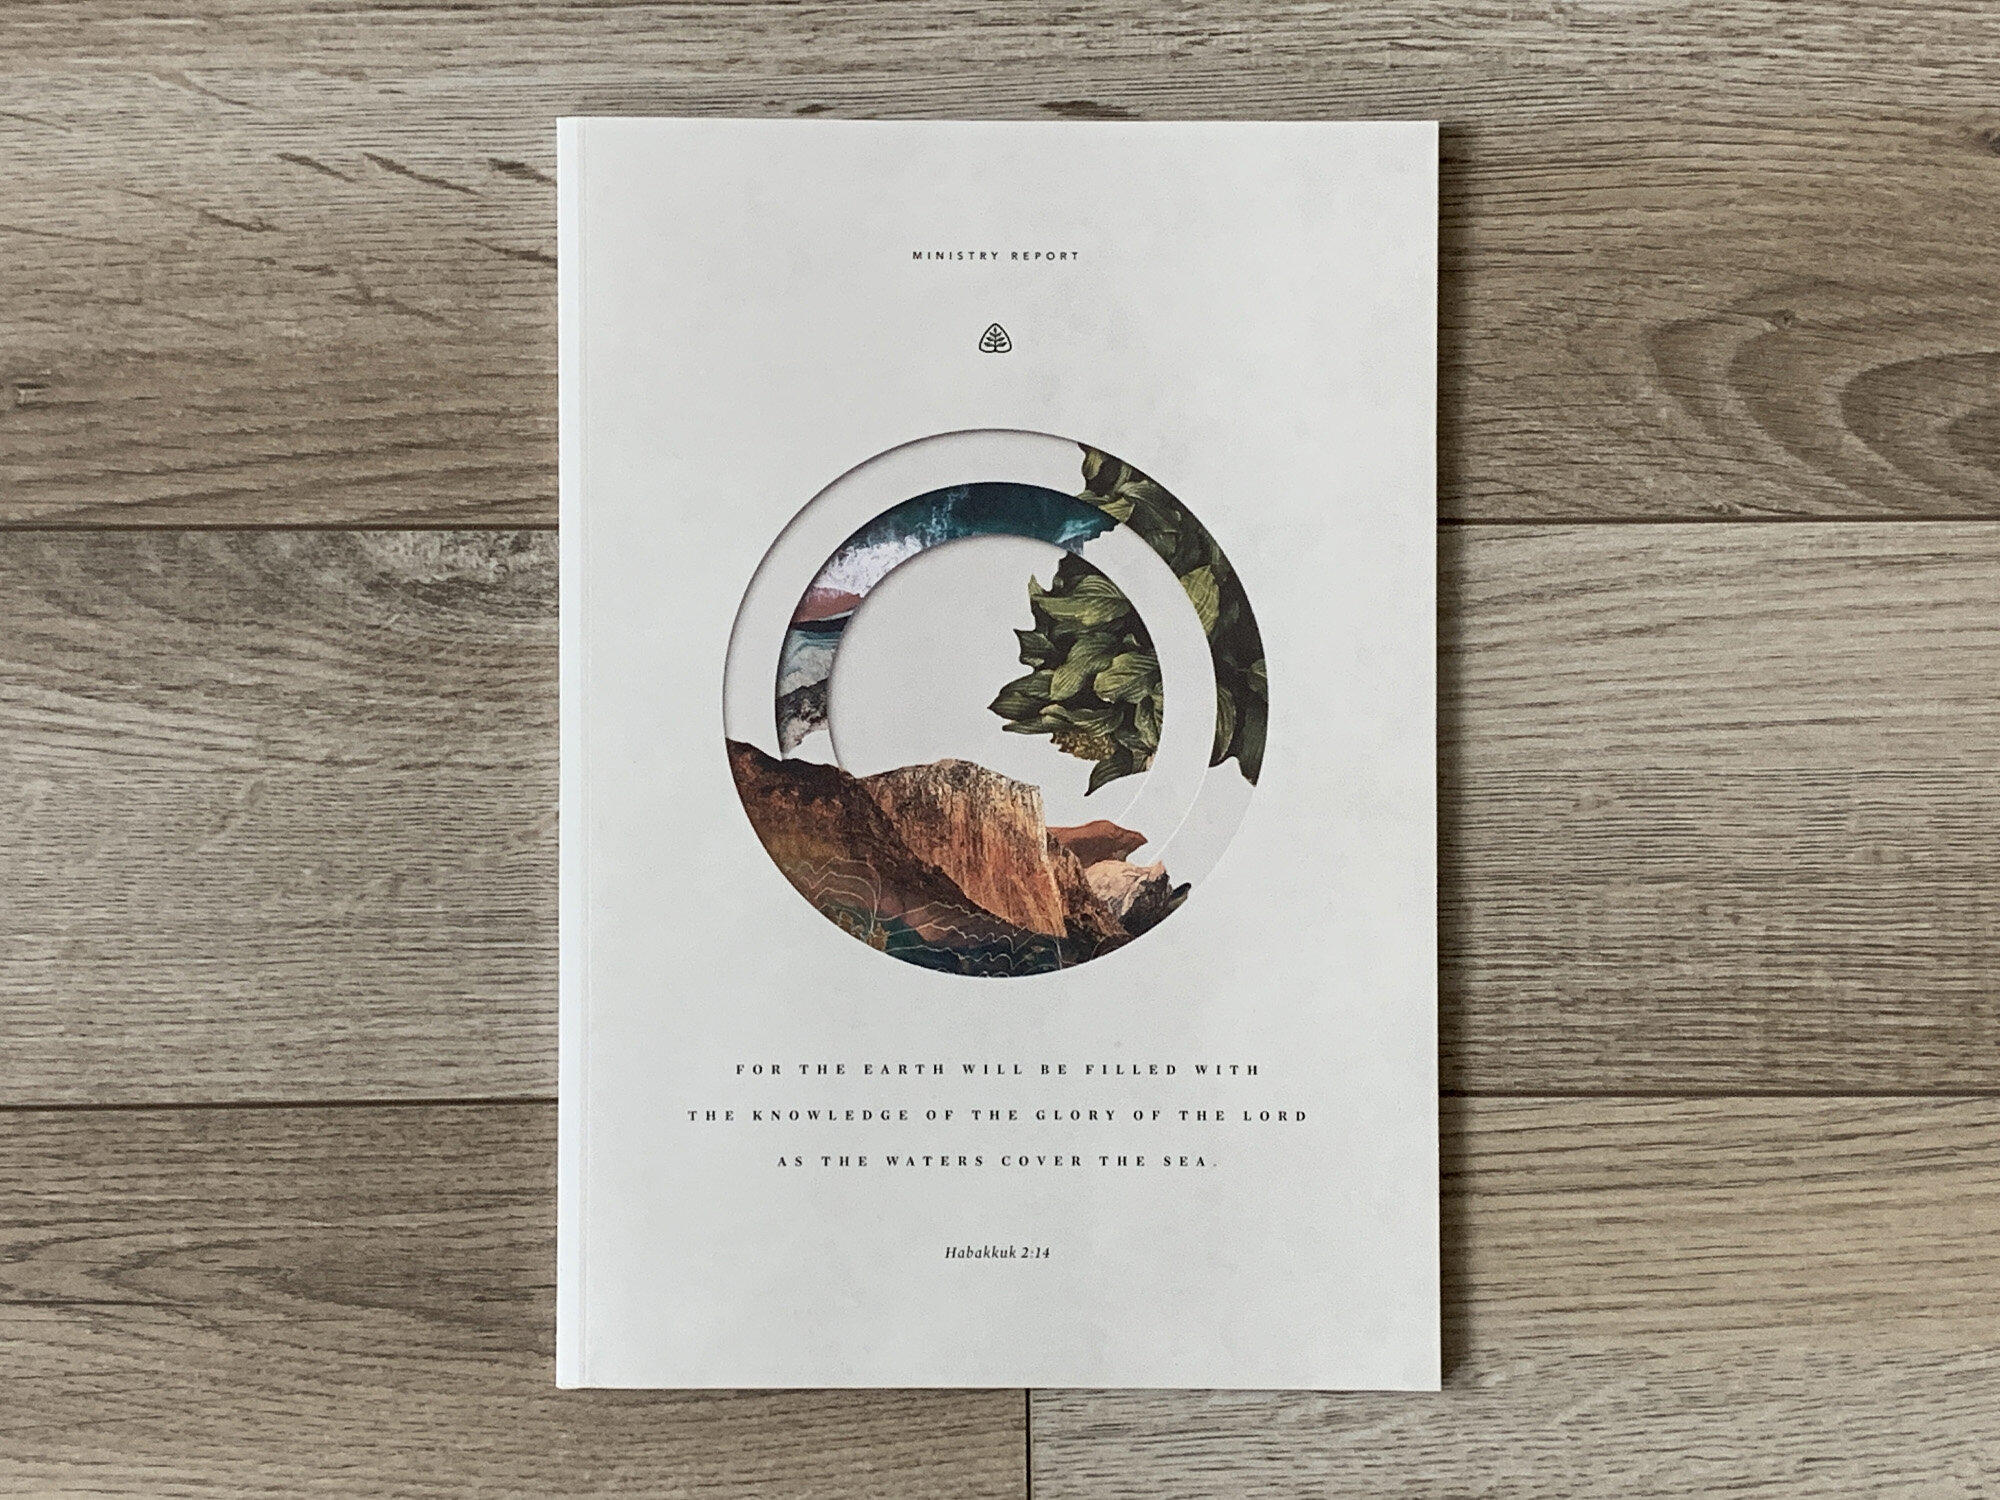  Cover and feature visuals for Ligonier’s 2018 Ministry Report